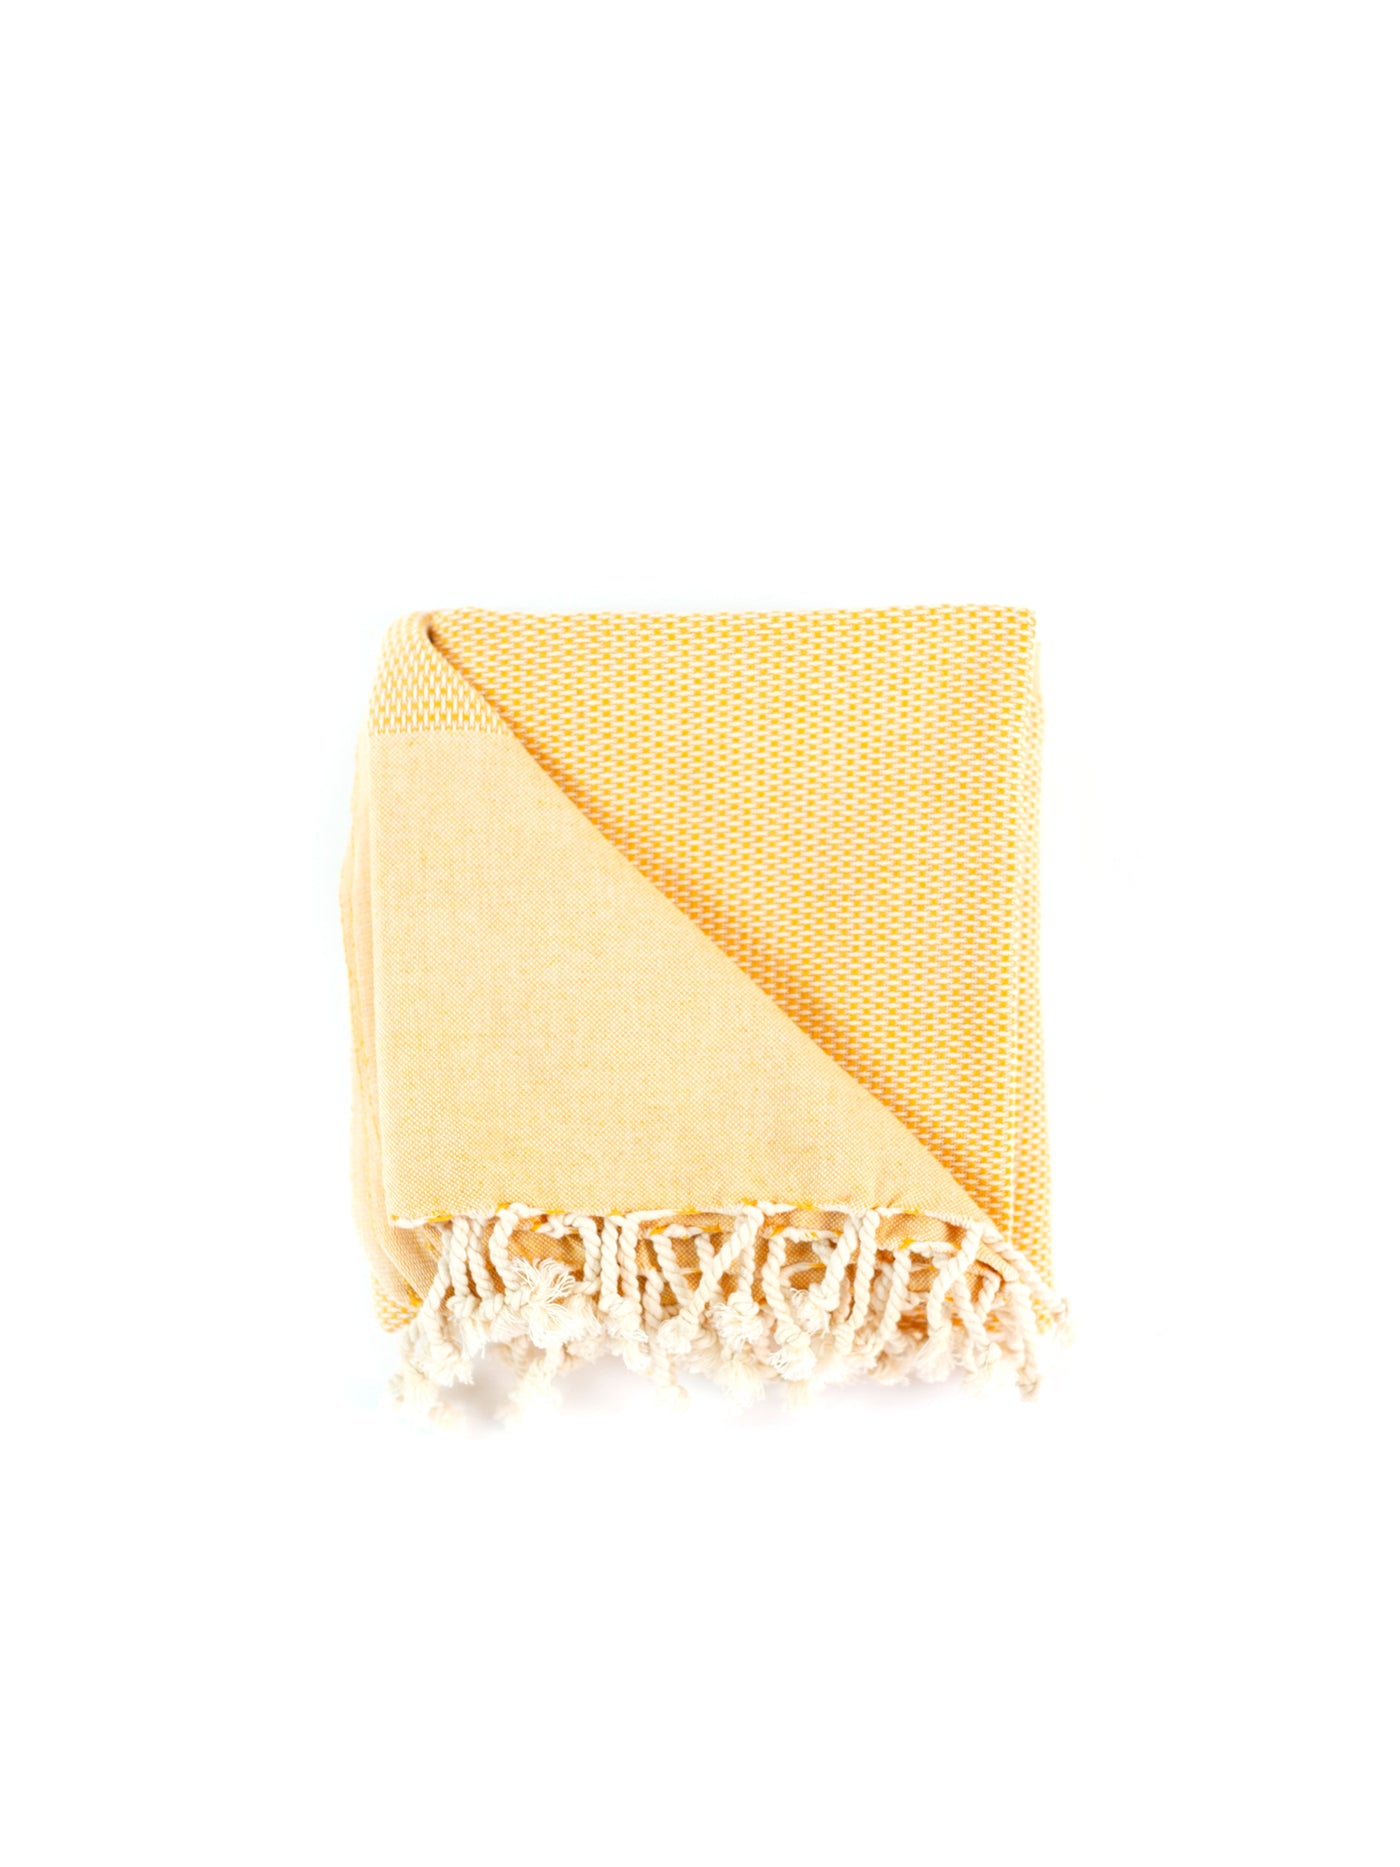 Porto • Sand Free Beach Towel by Sunkissed